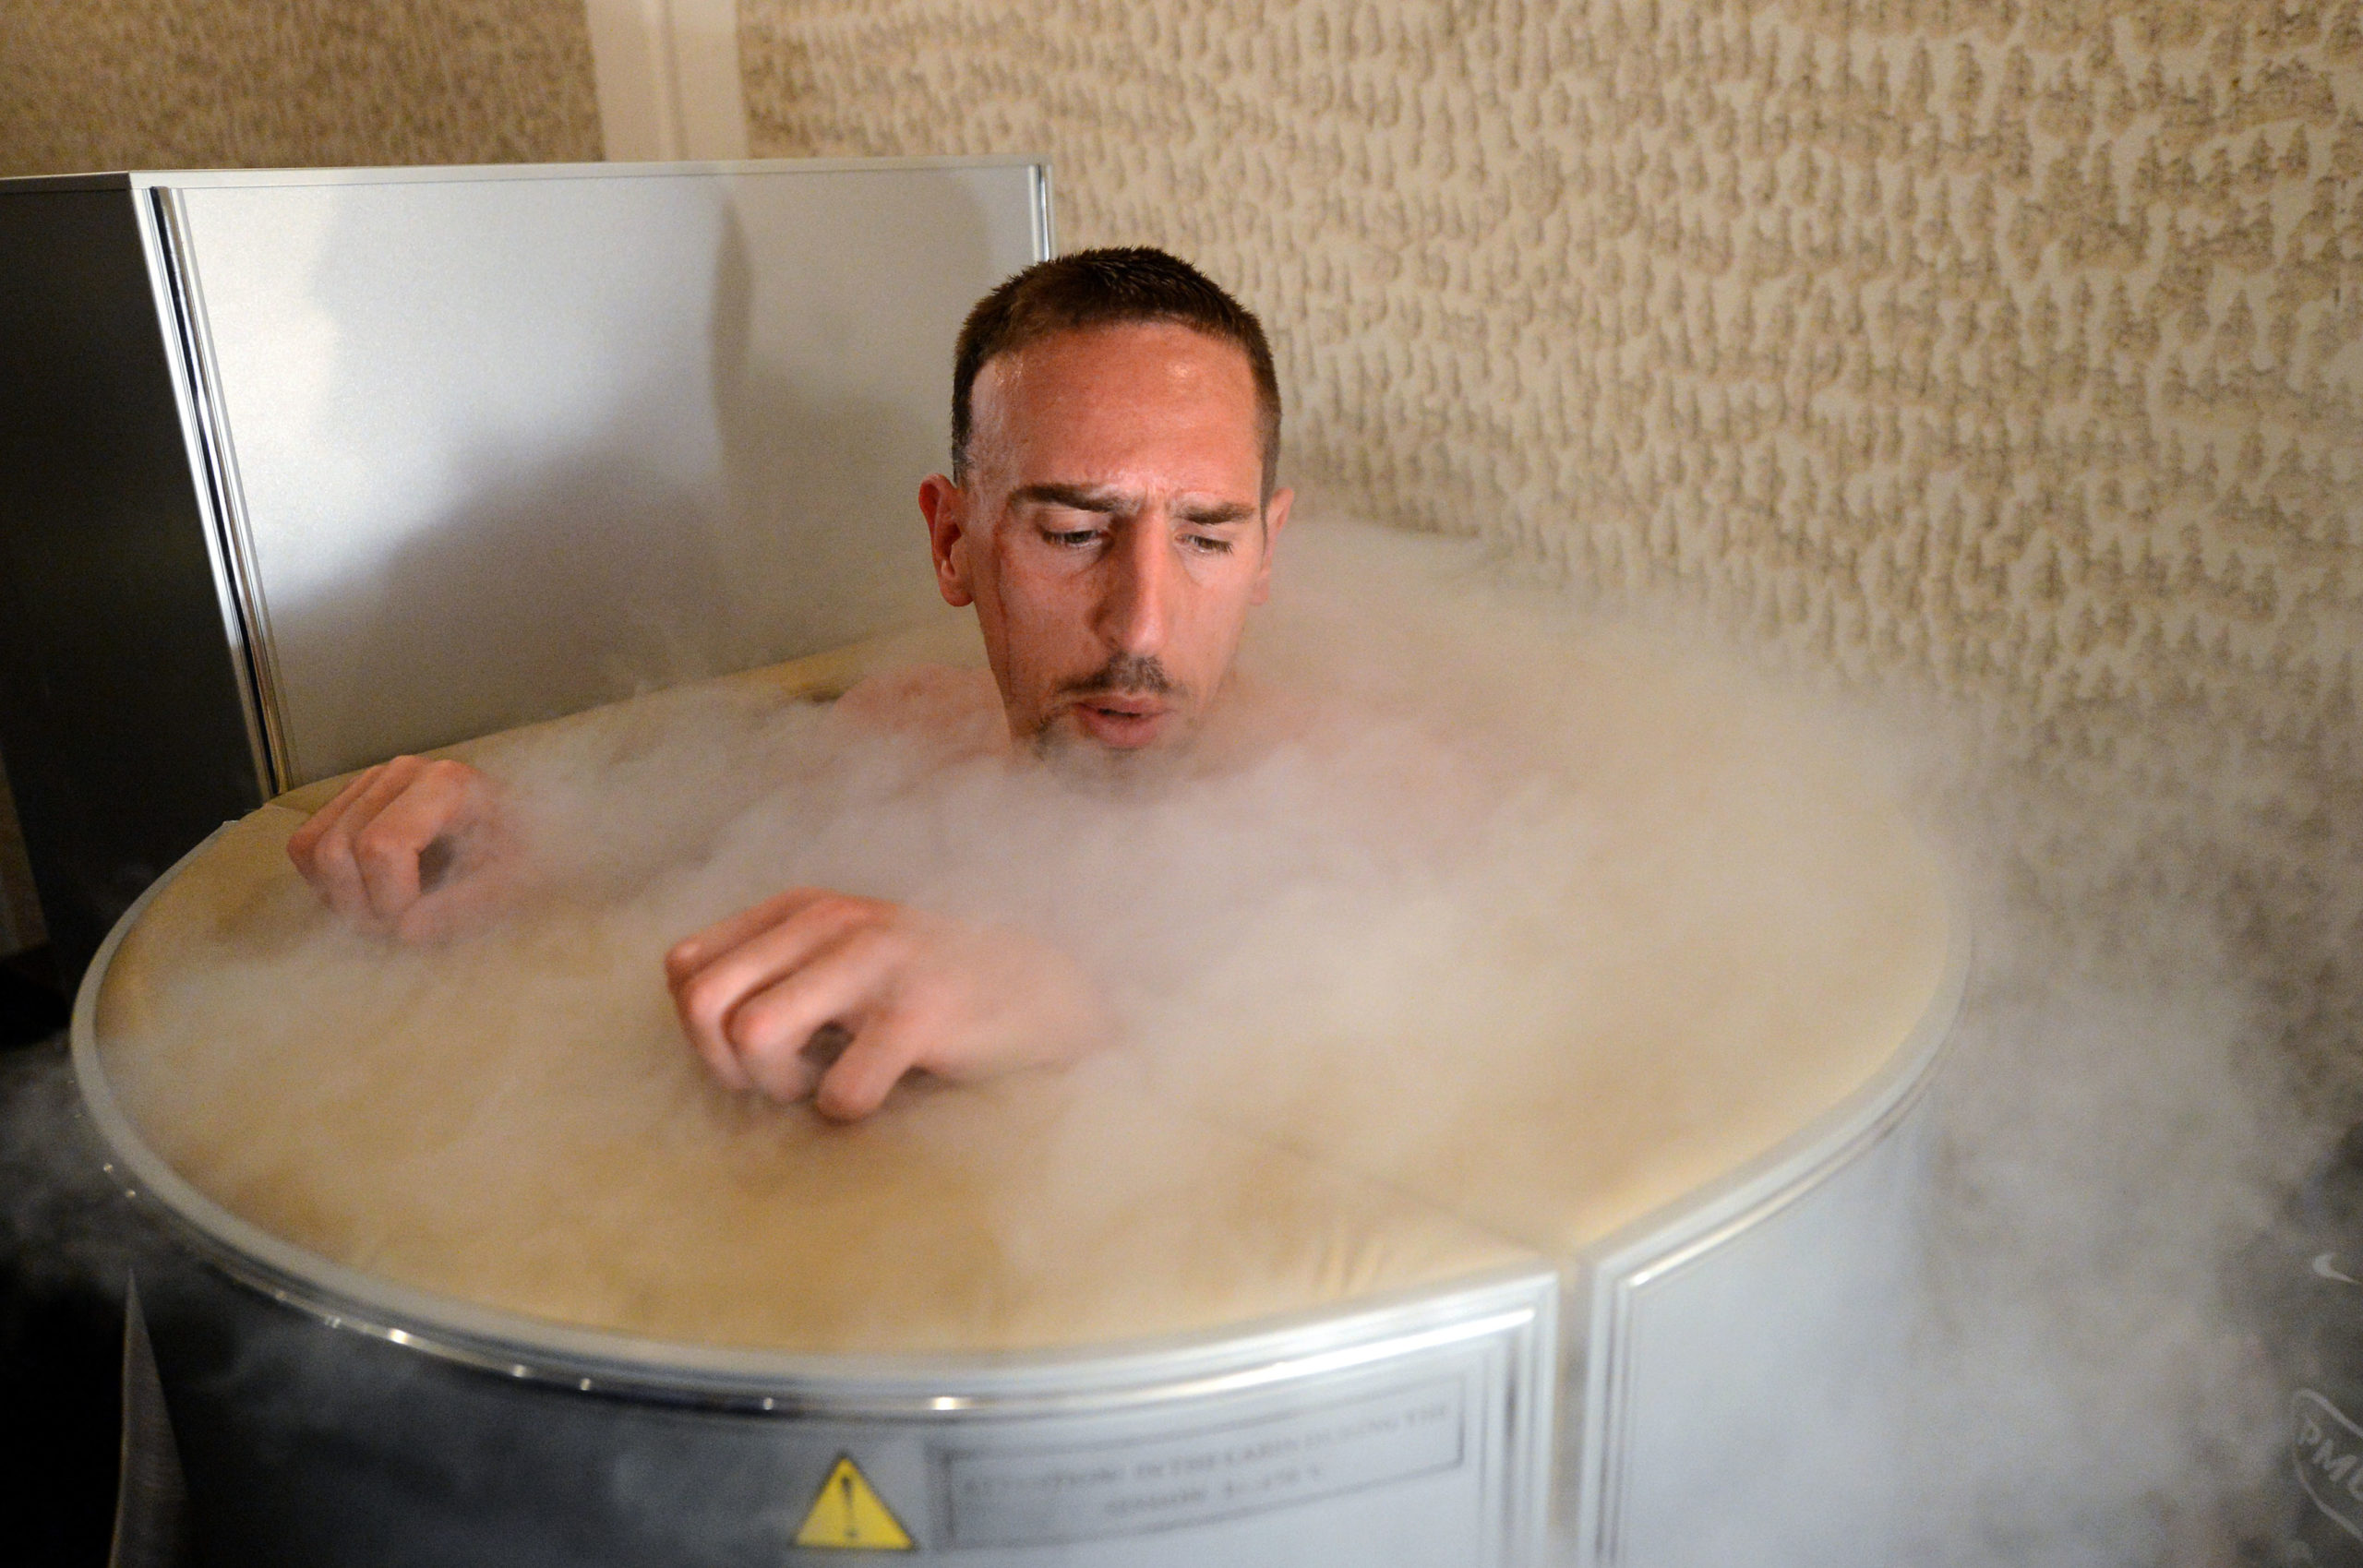 US Feds Call Warn Against Whole Body Cryotherapy